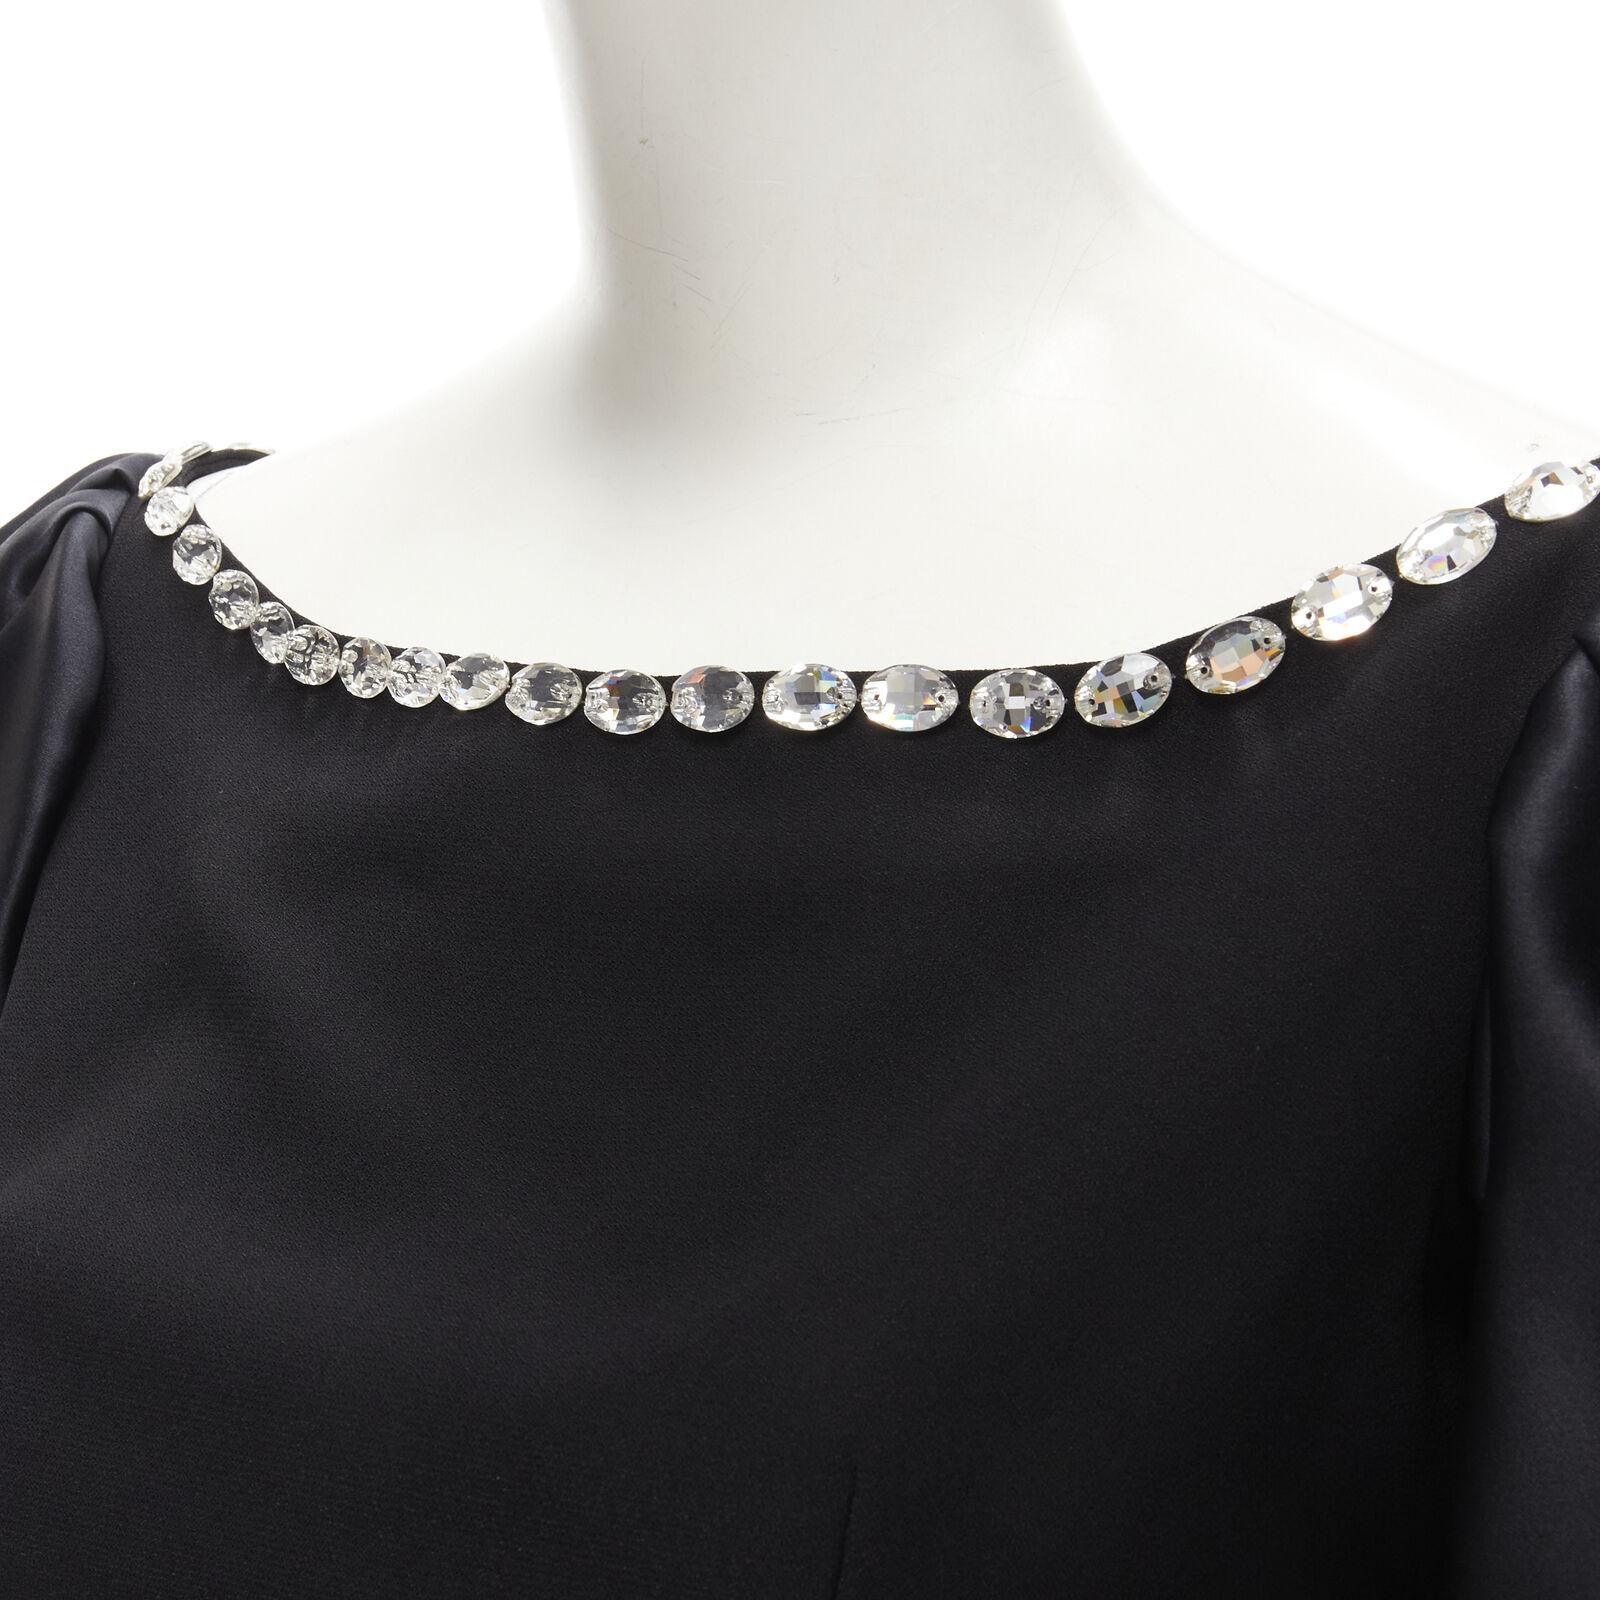 RASARIO black crystal embellished neckline puff balloon sleeves dress FR36 S
Reference: AAWC/A00191
Brand: Rasario
Material: Polyester, Silk
Color: Black
Pattern: Solid
Closure: Zip
Lining: Fabric
Made in: Russia

CONDITION:
Condition: Excellent,